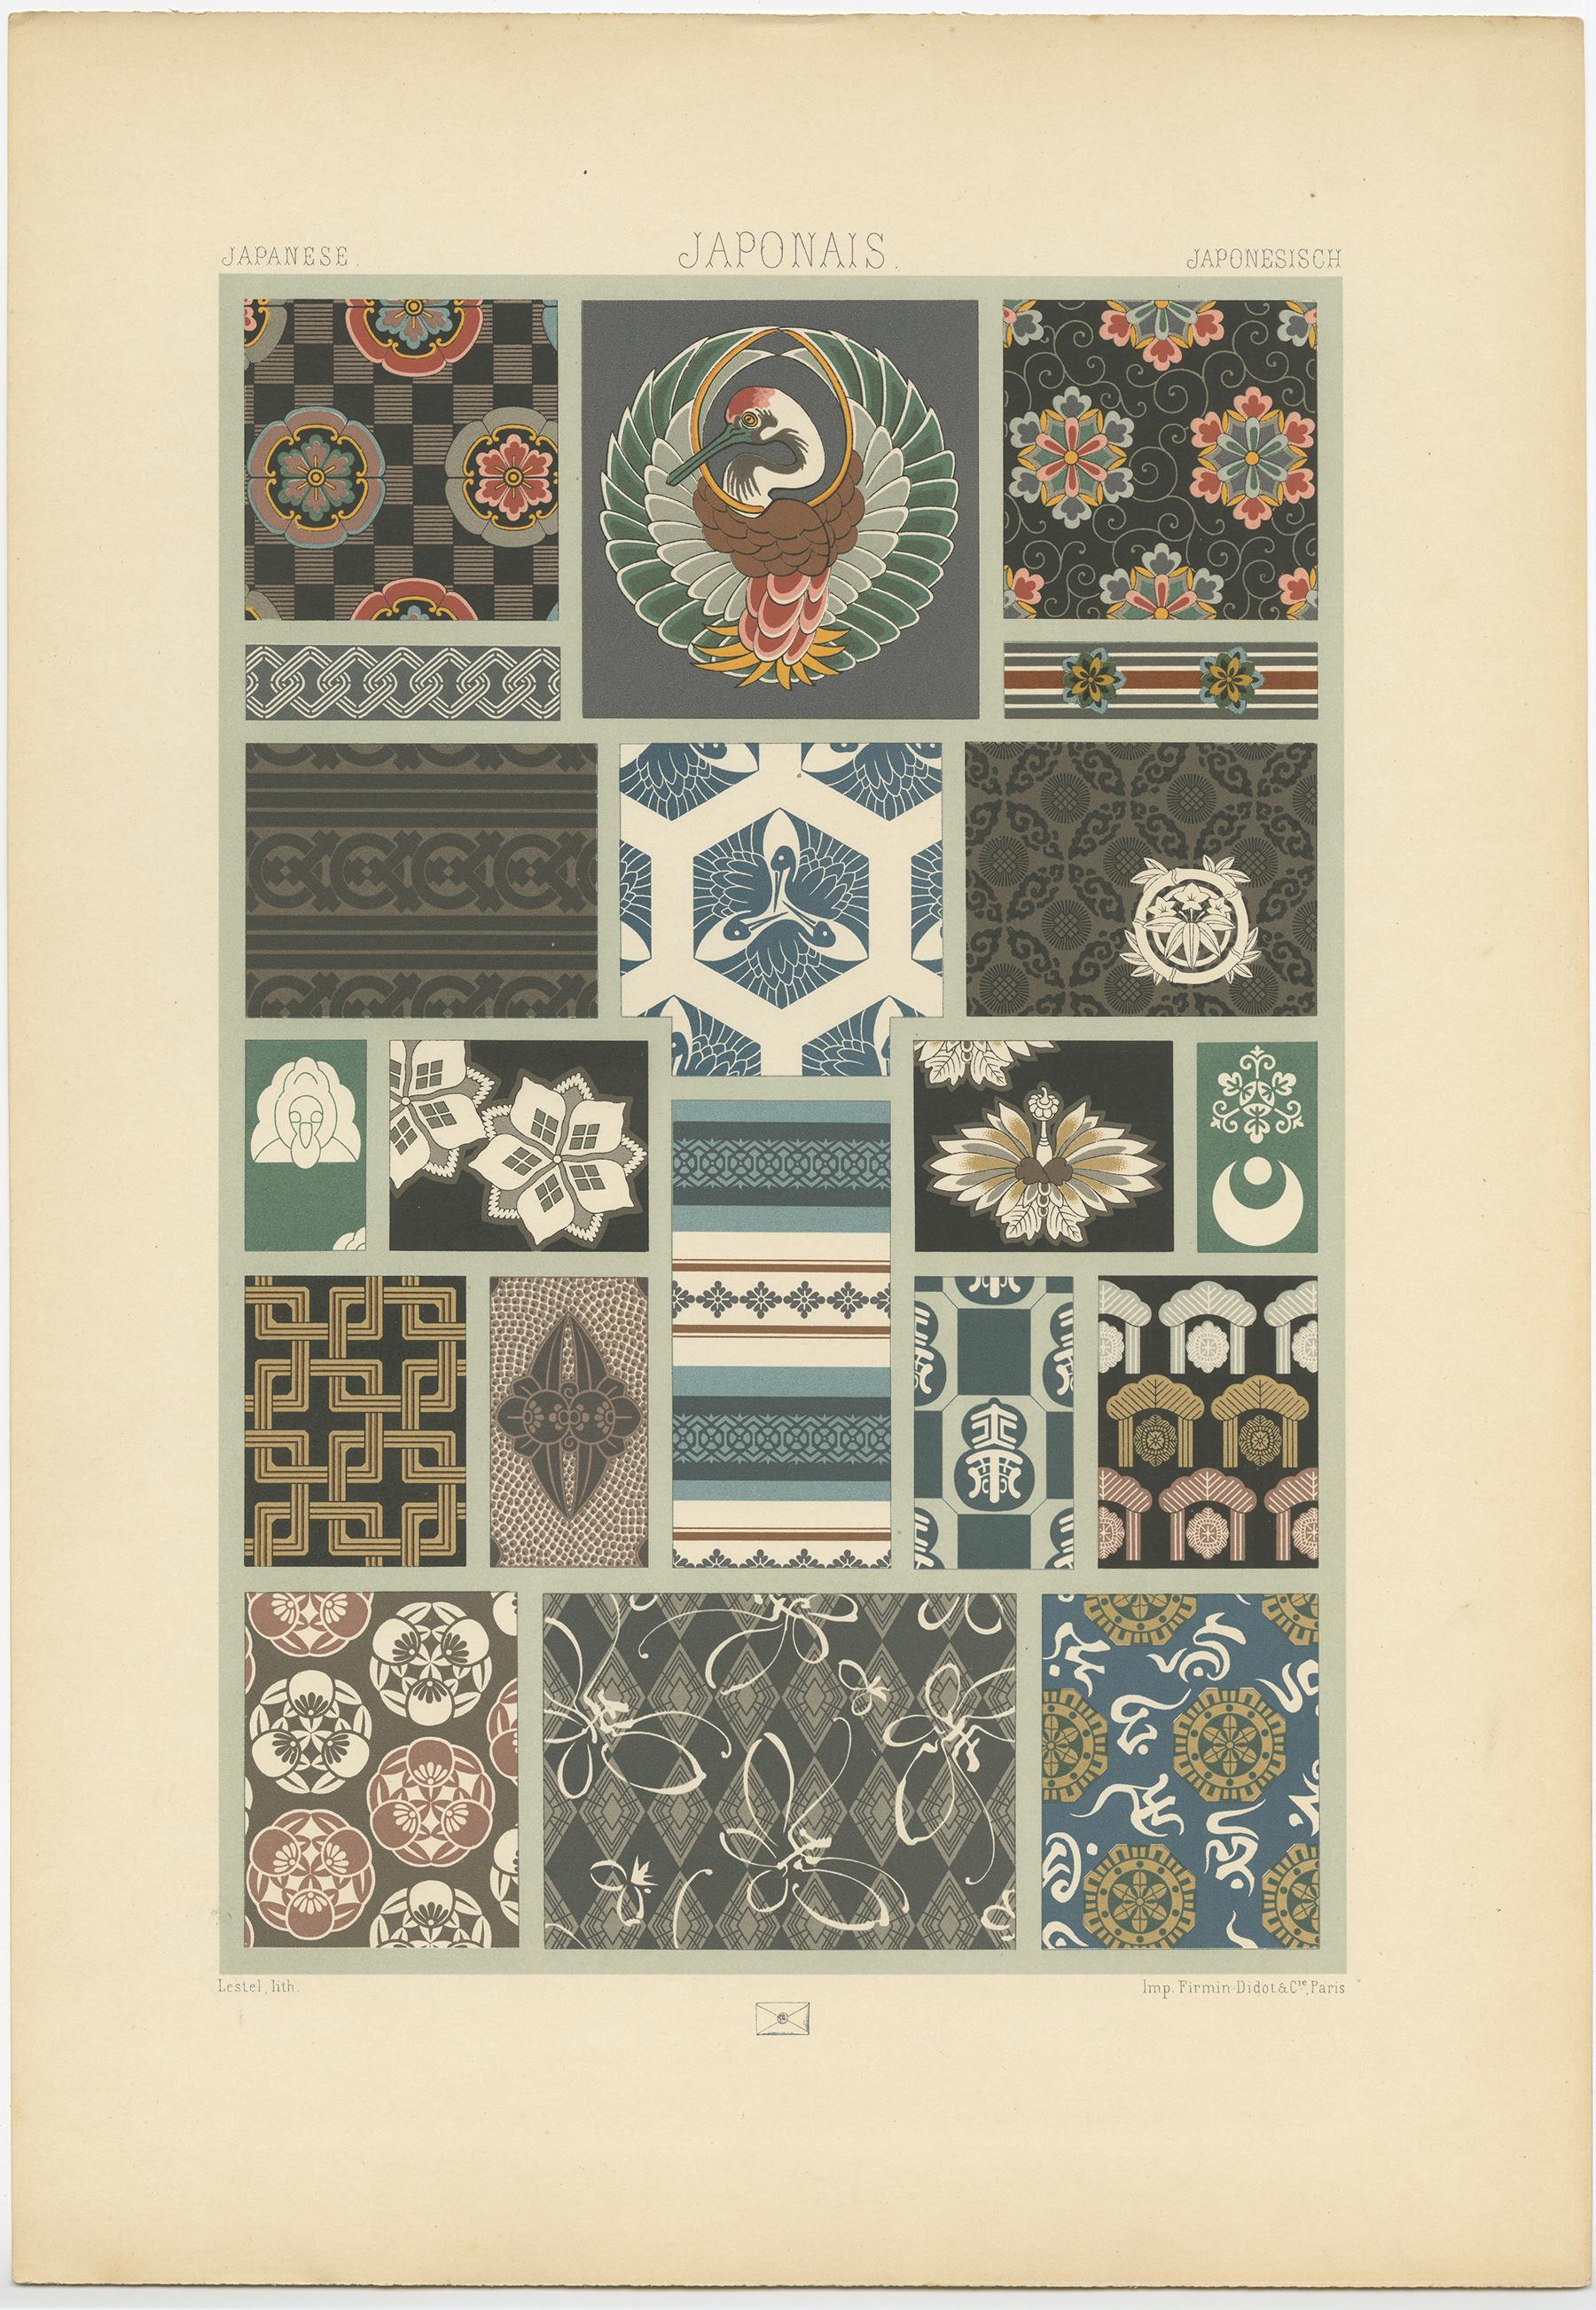 Antique print titled 'Japanese - Japonais - Japonesisch'. Chromolithograph of Japanese motifs from textiles and wallpapers ornaments. This print originates from 'l'Ornement Polychrome' by Auguste Racinet. Published circa 1890.